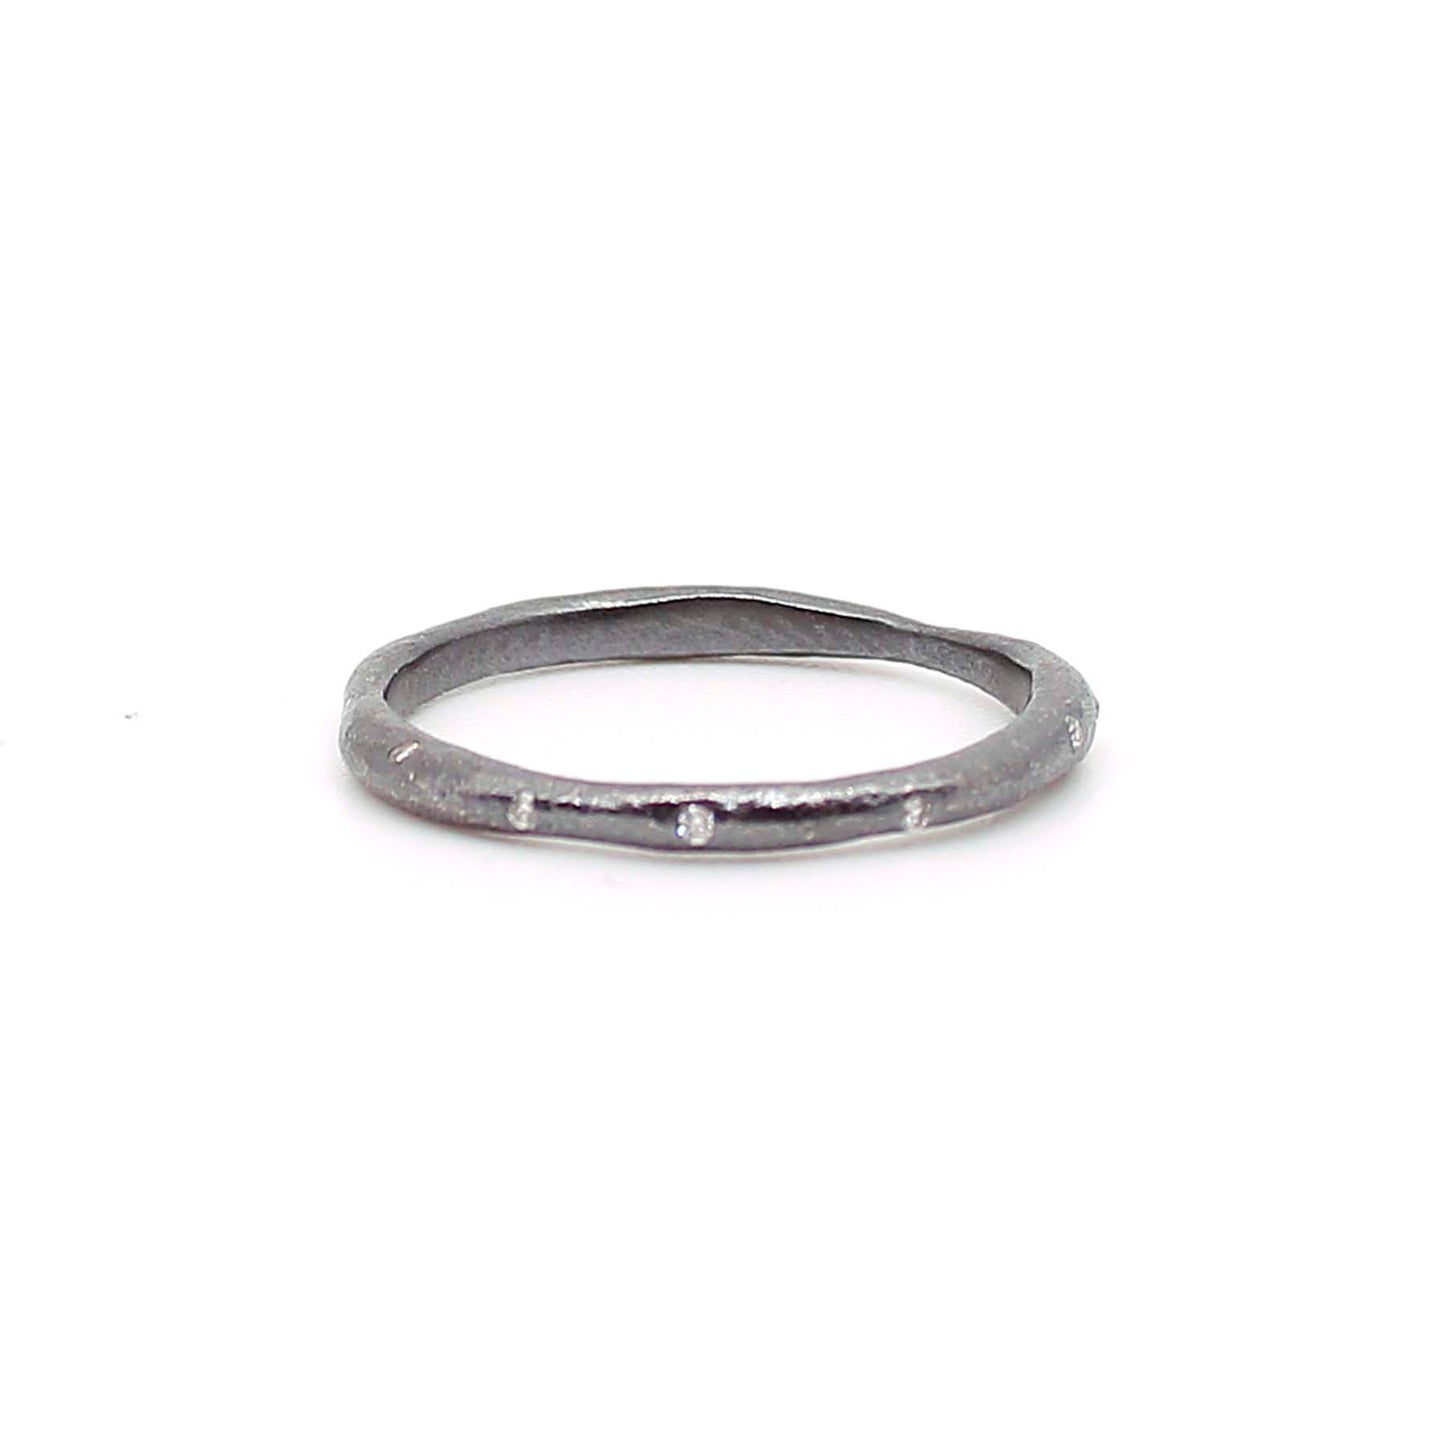 Organic Texture Oxidized Sterling Silver Ring with Diamonds